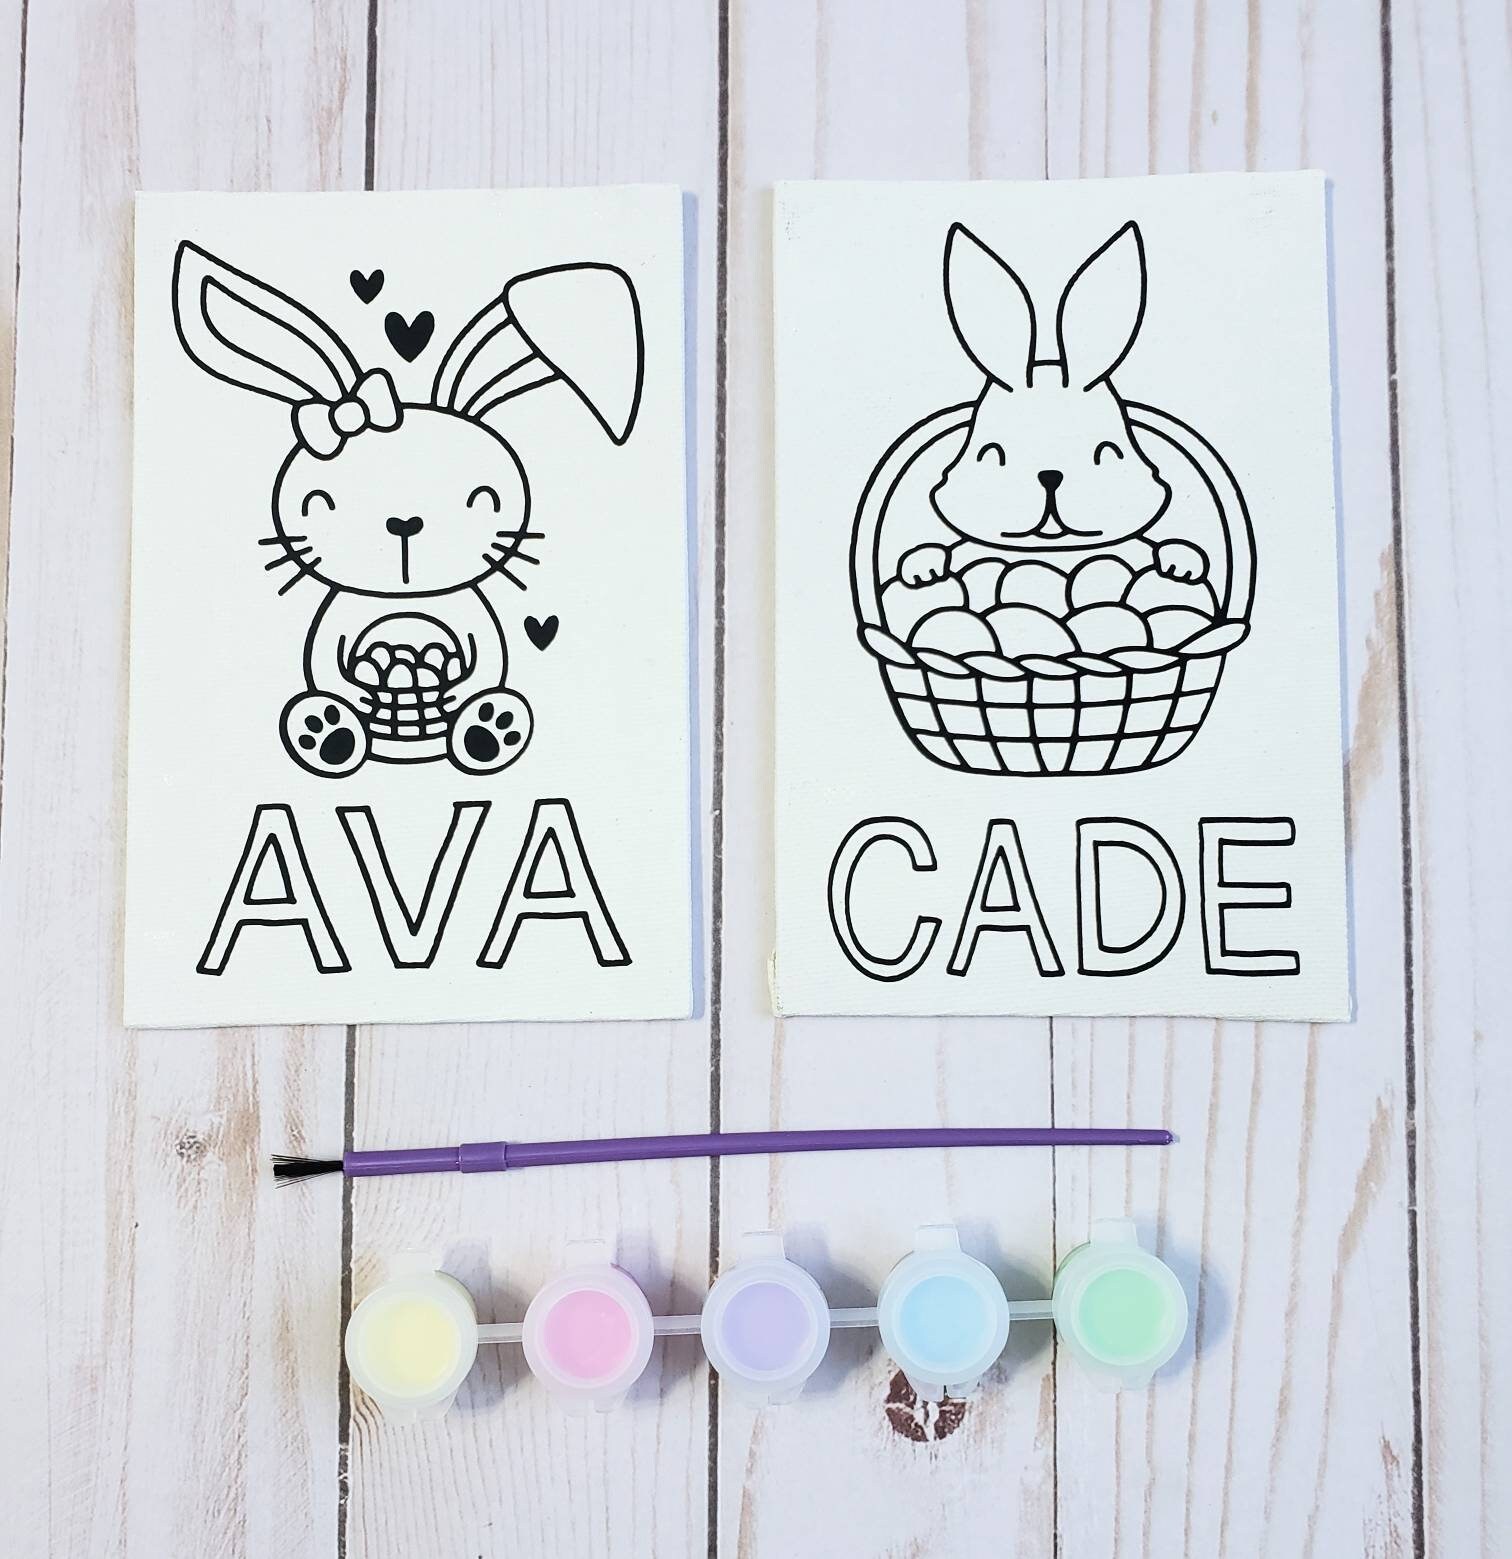 40 Painting Ideas For Kids  Easter paintings, Bunny painting, Easy canvas  painting